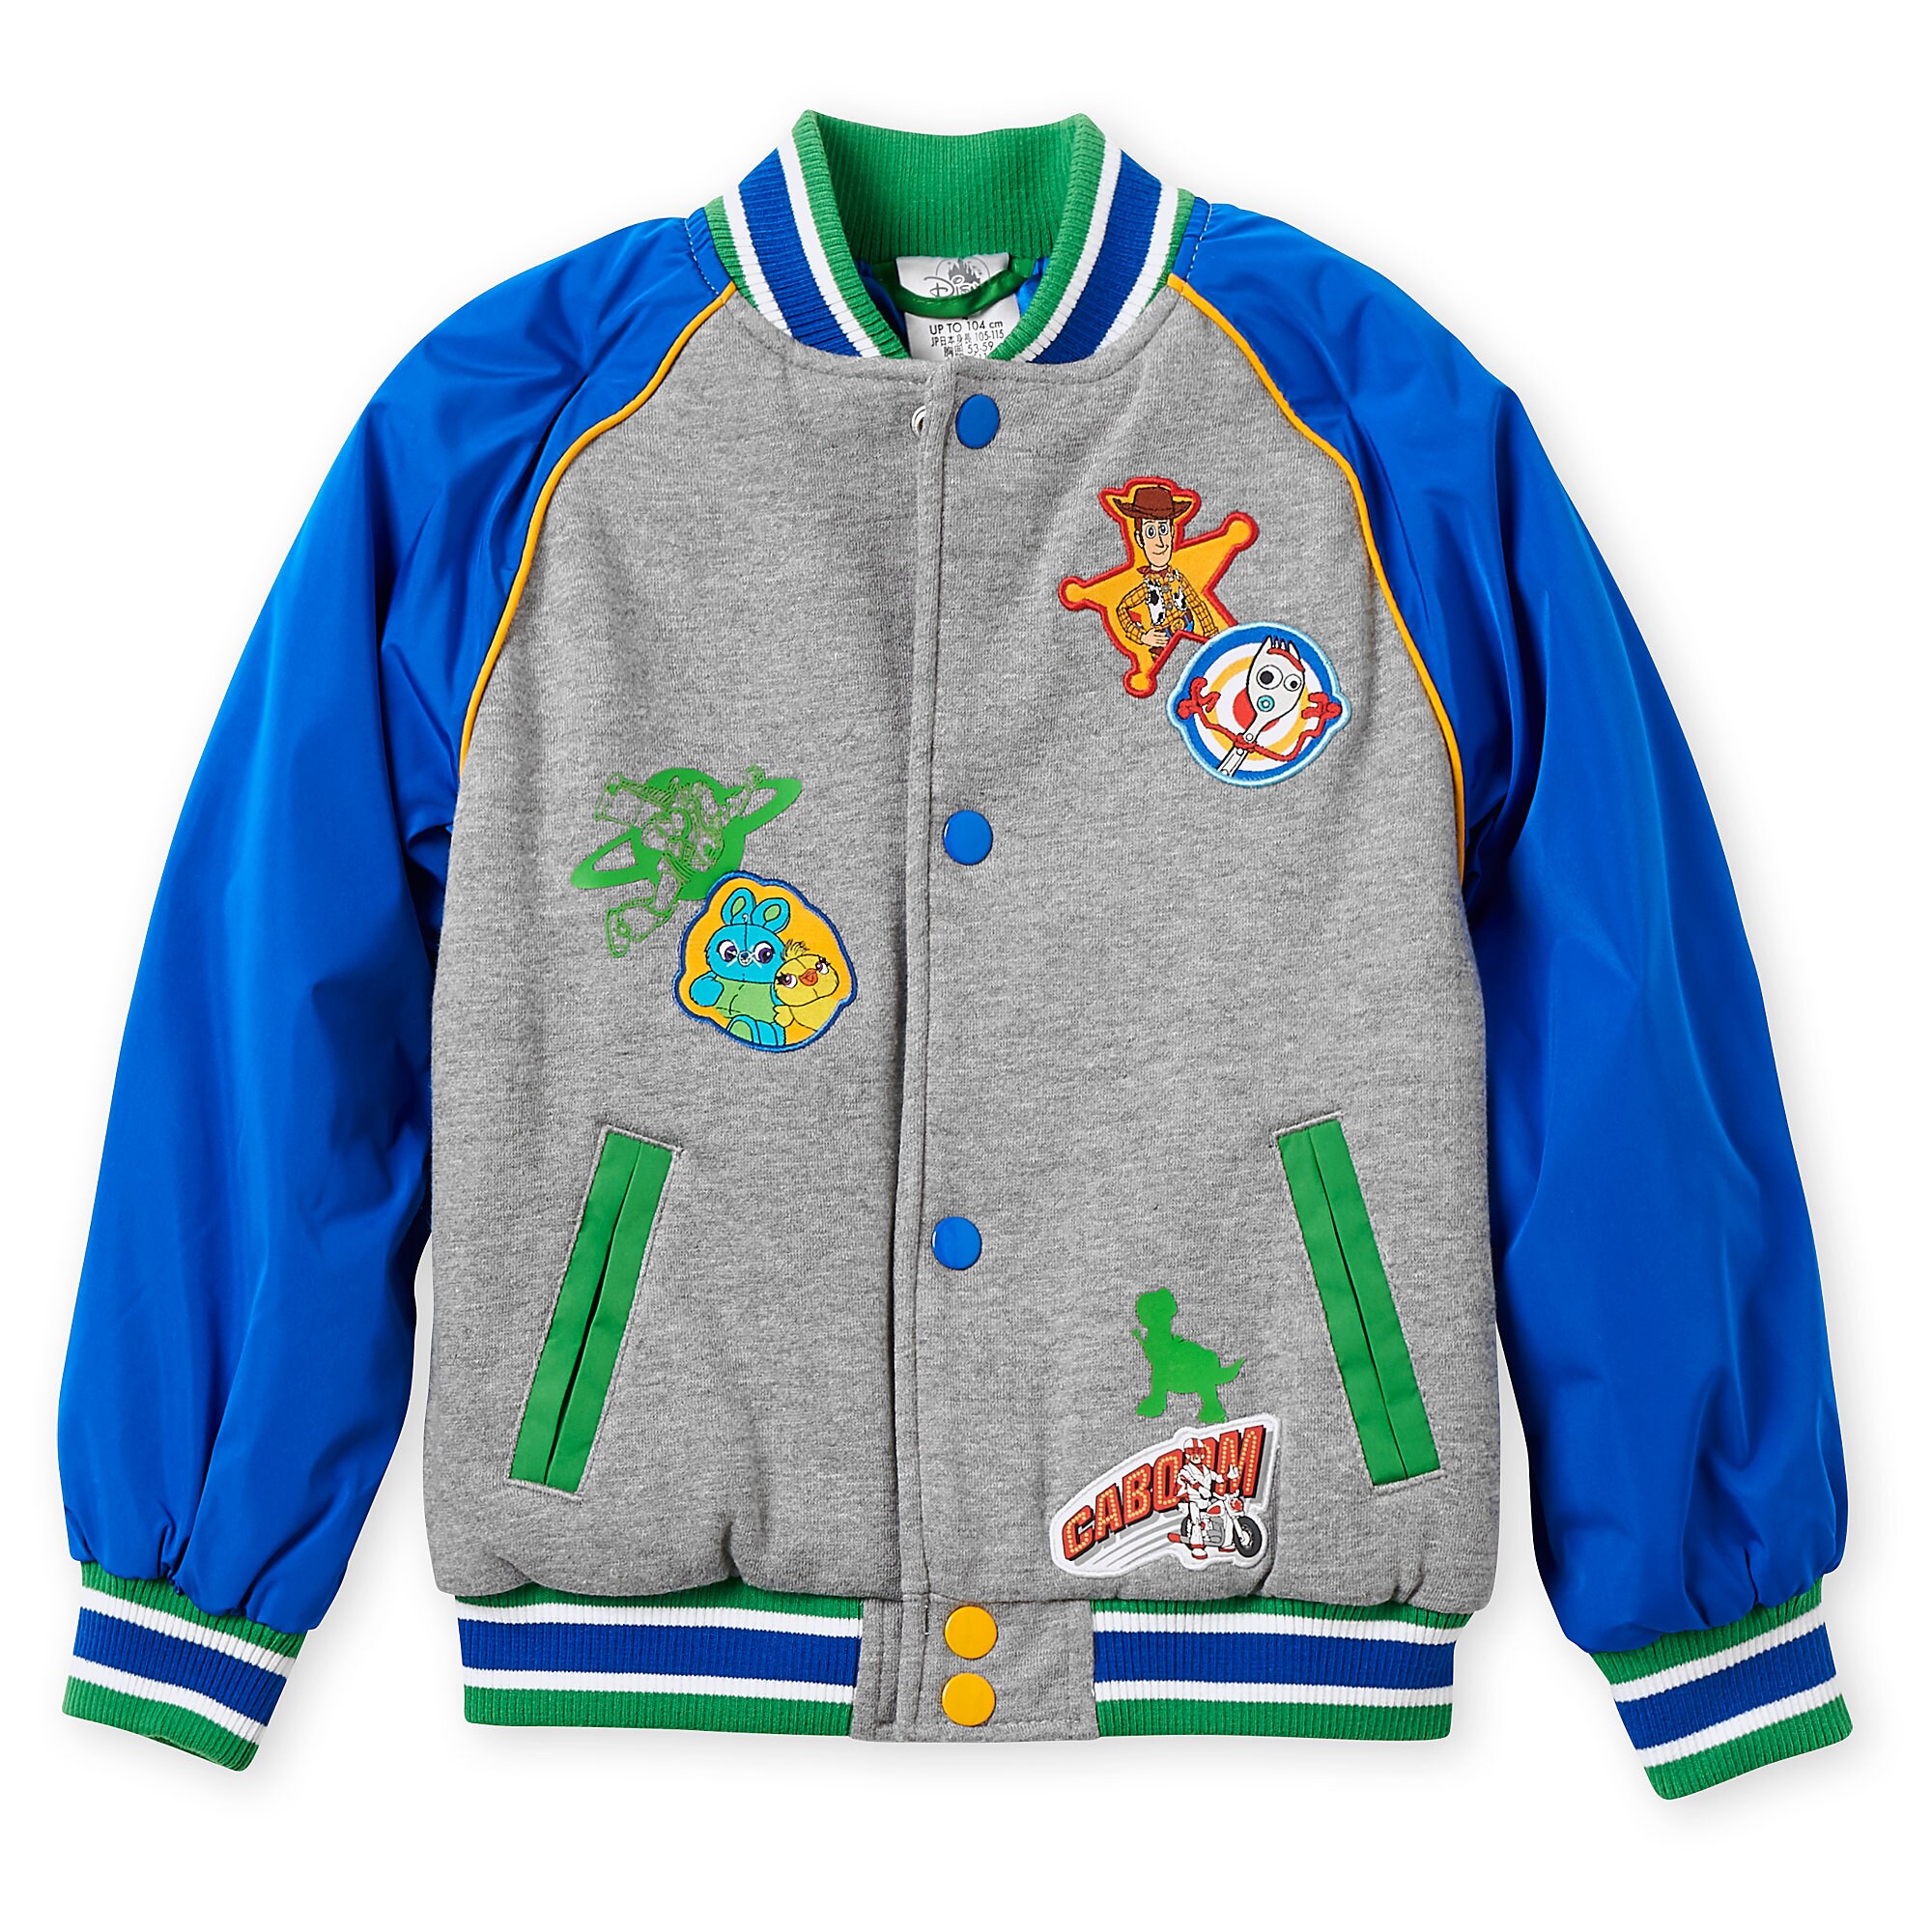 Toy Story 4 Varsity Jacket for Boys - Personalized released today – Dis ...